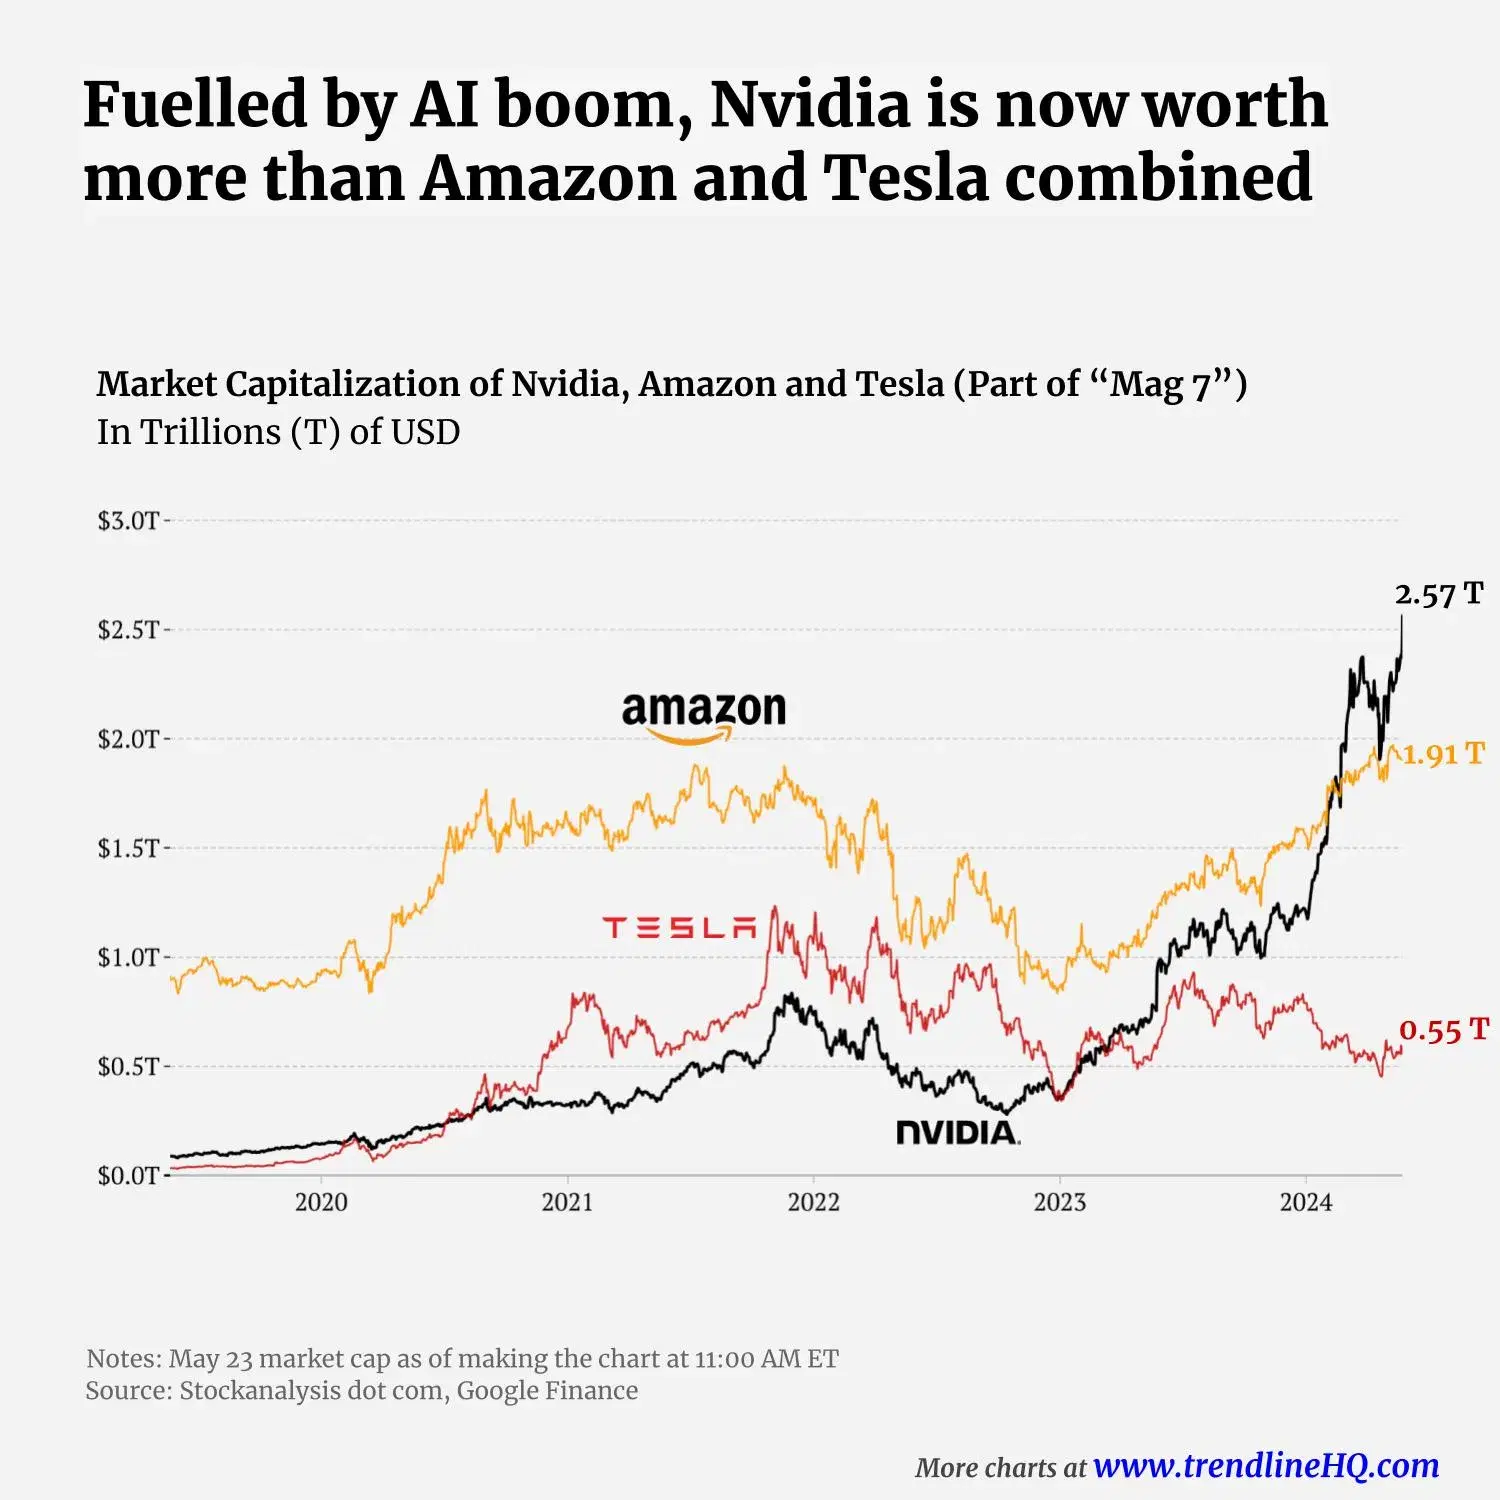 Nvidia is now worth more than Amazon and Tesla combined